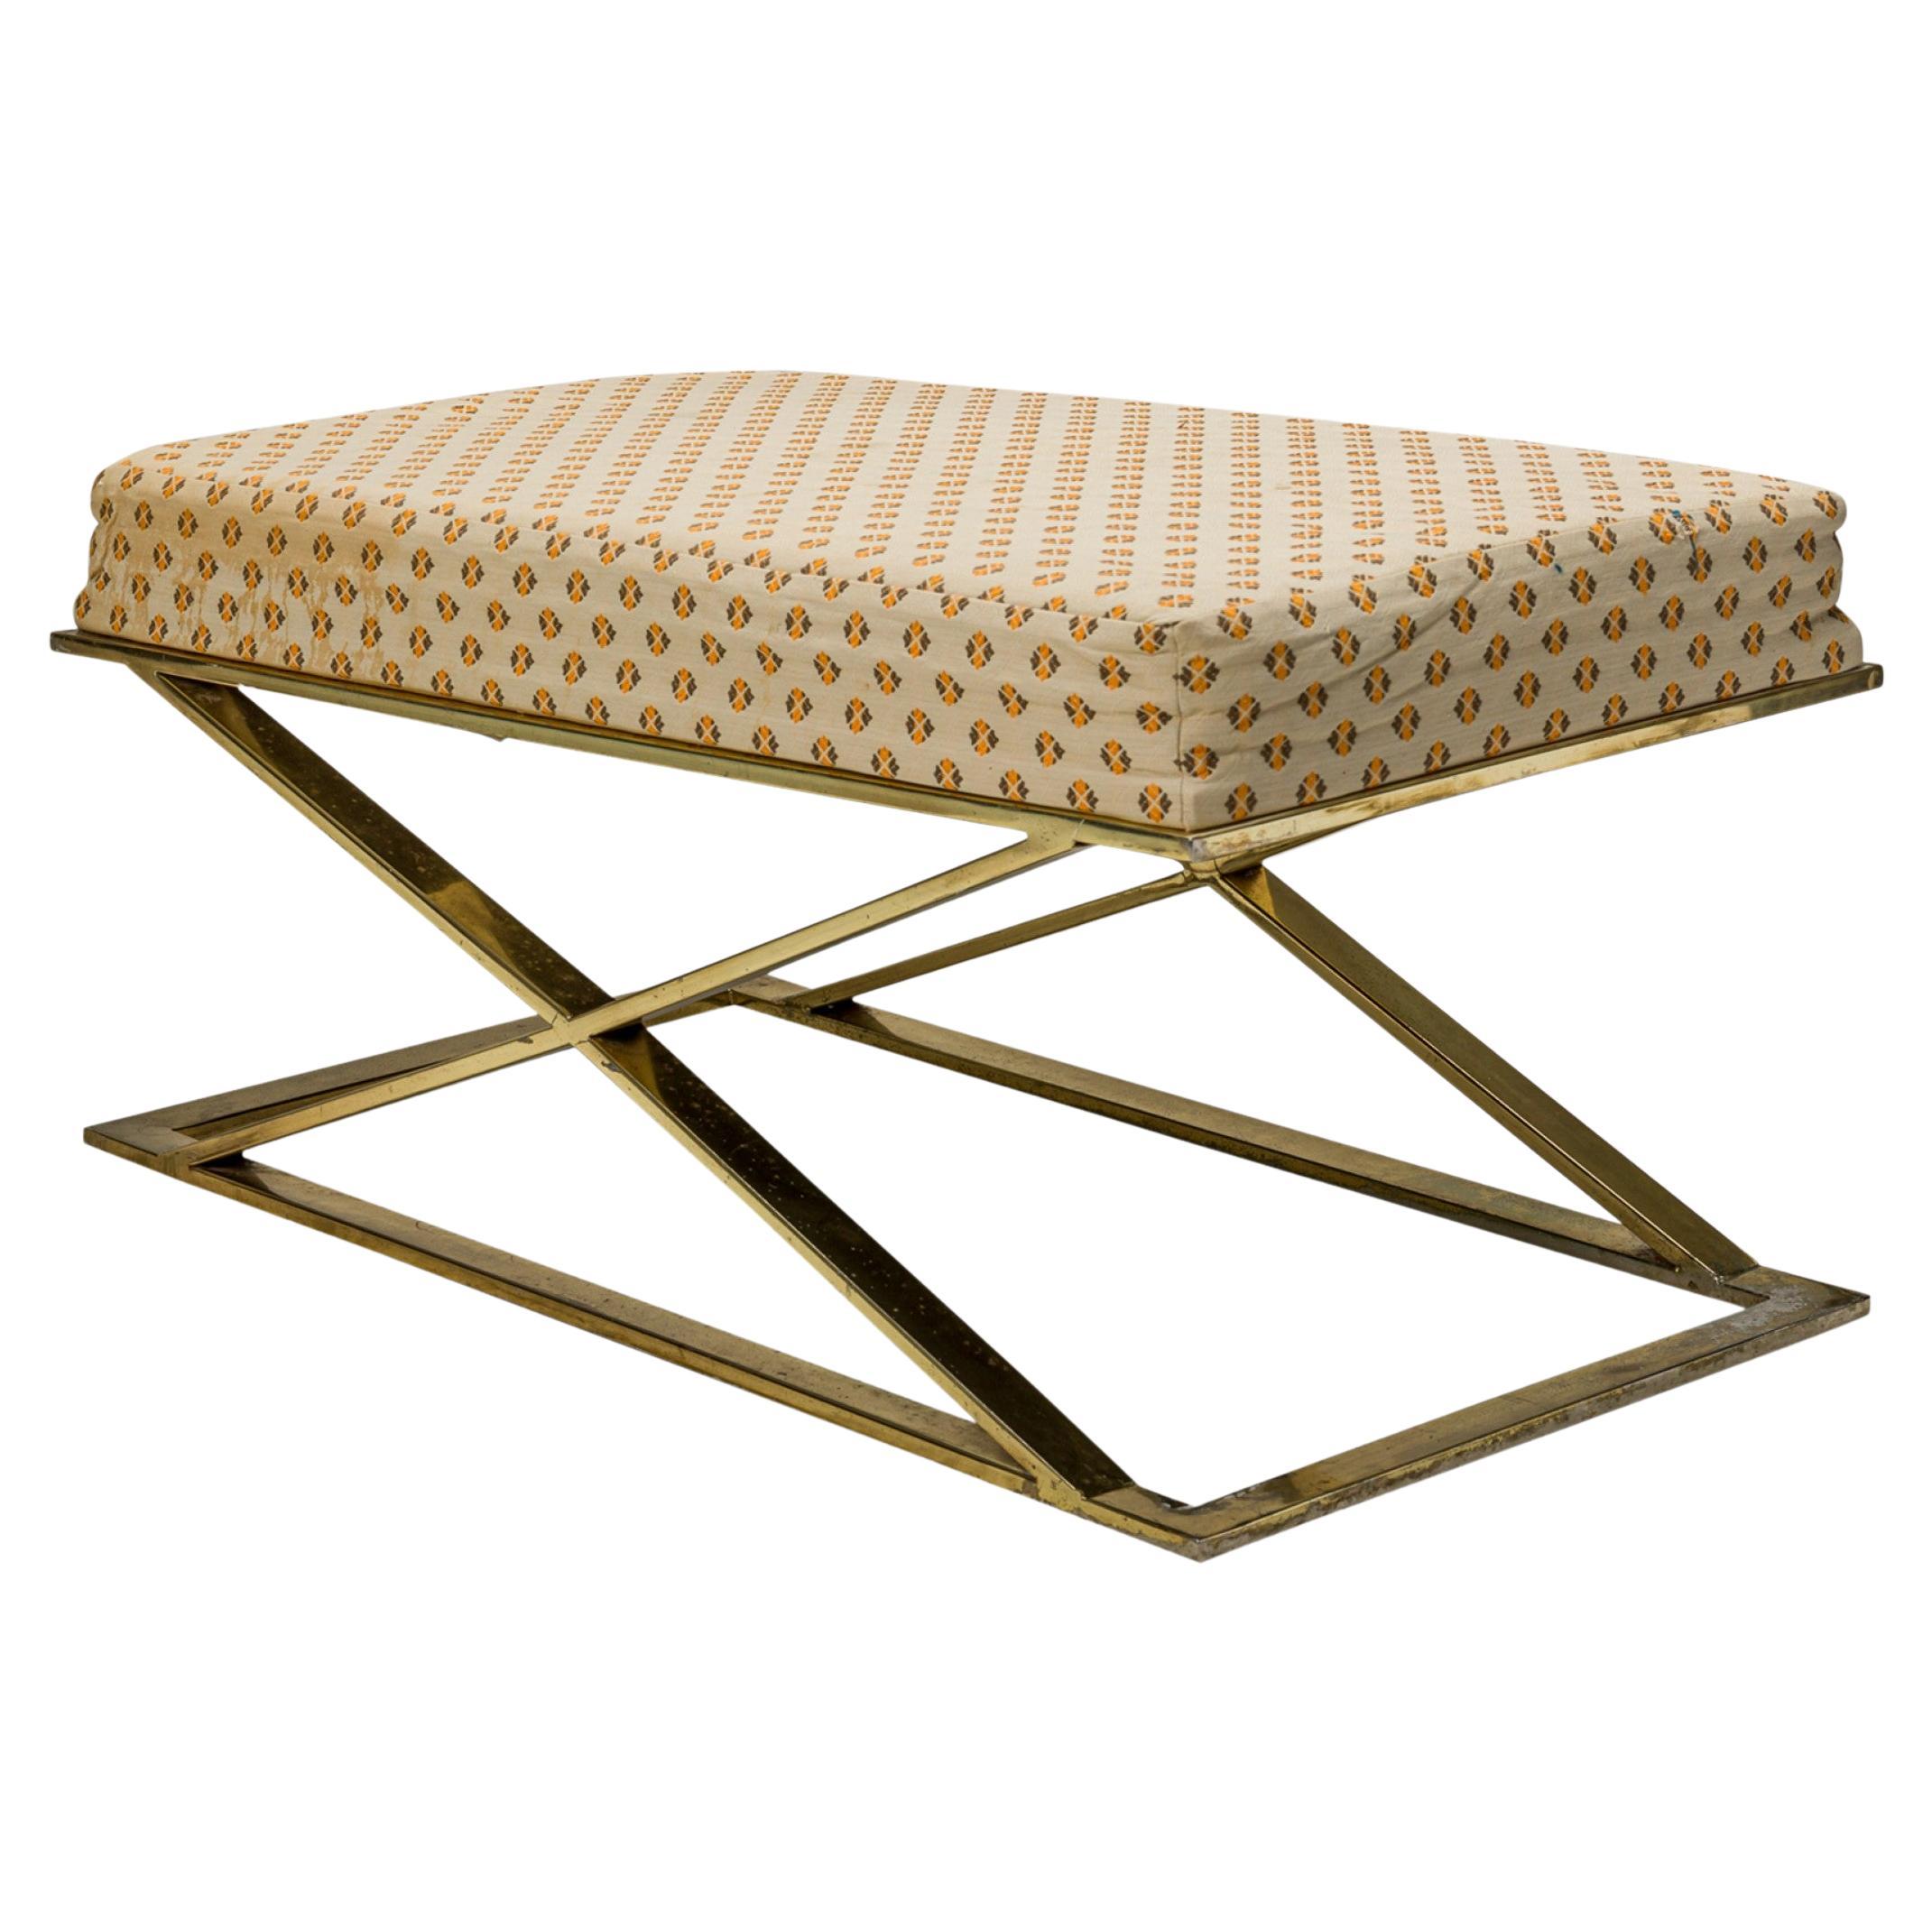 Milo Baughman / Thayer Coggin Brass and Beige Patterned Upholstered X-Bench